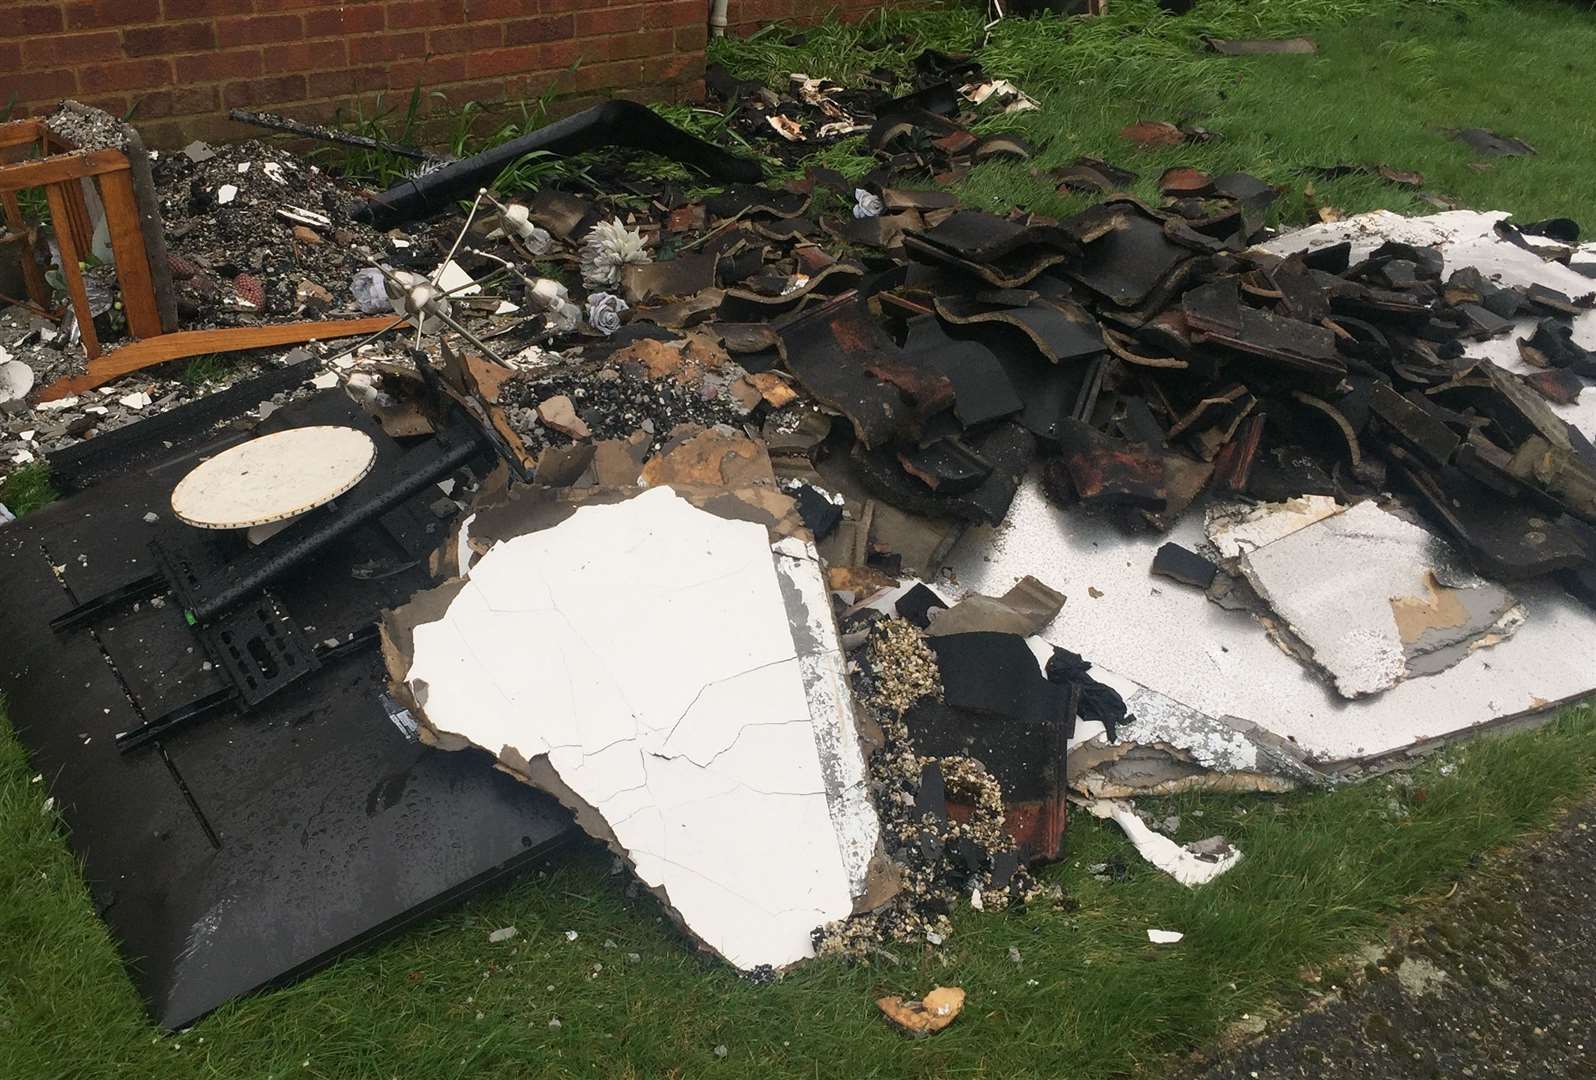 Many of the family's possessions have been left charred